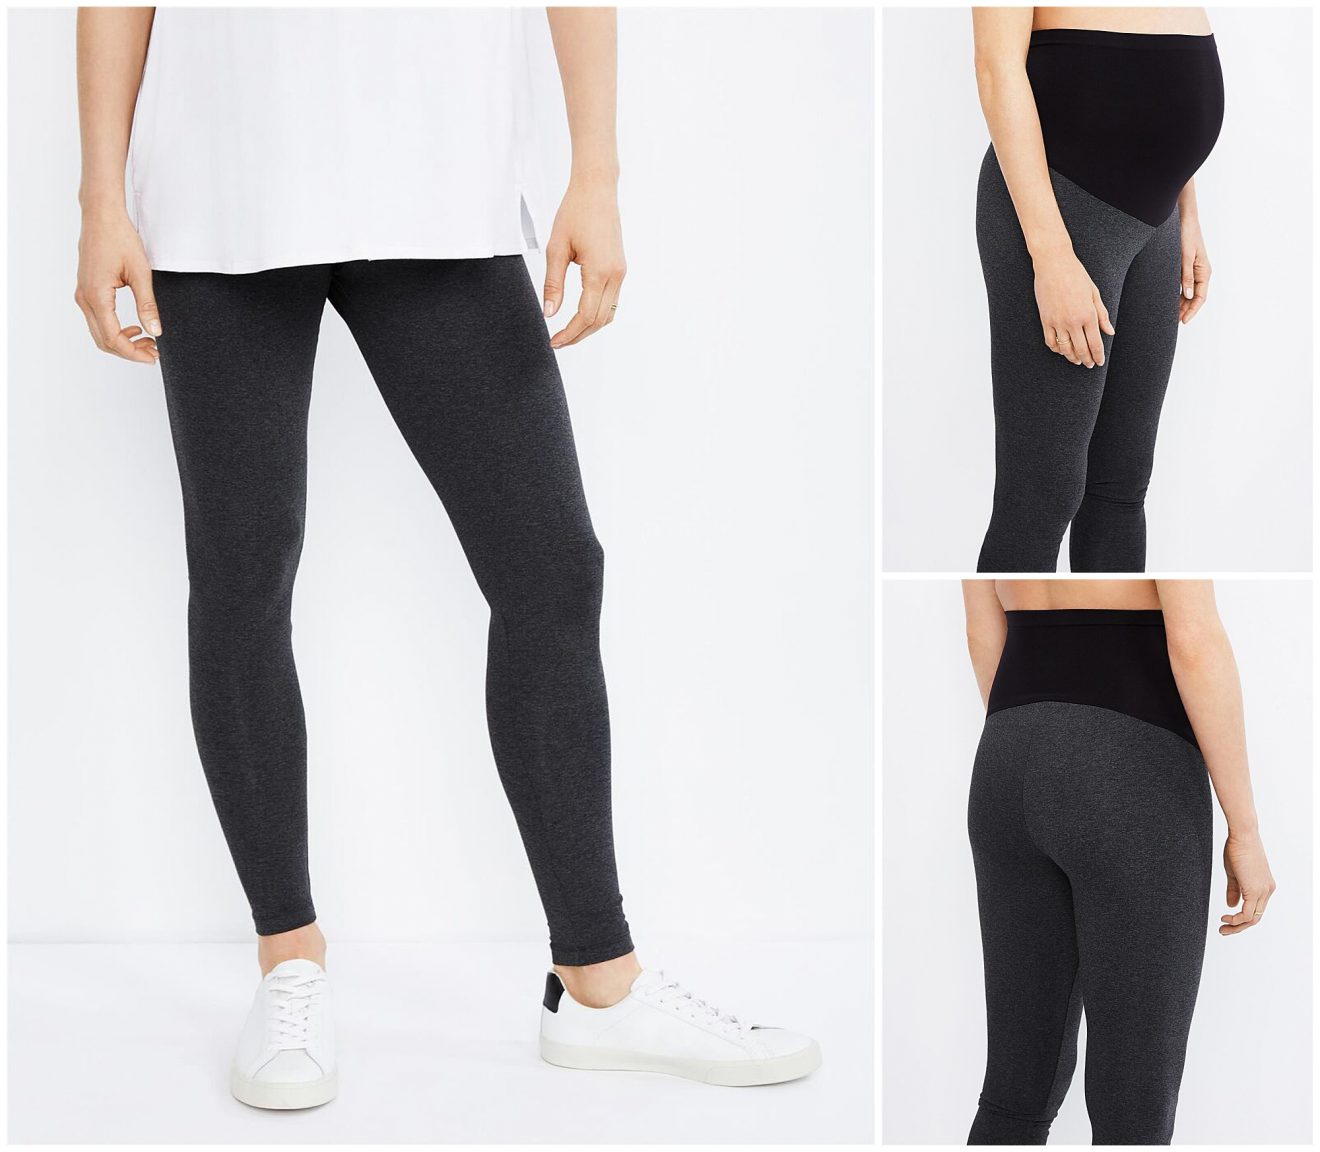 The 10 Best Maternity Leggings of 2020 | Baby Chick